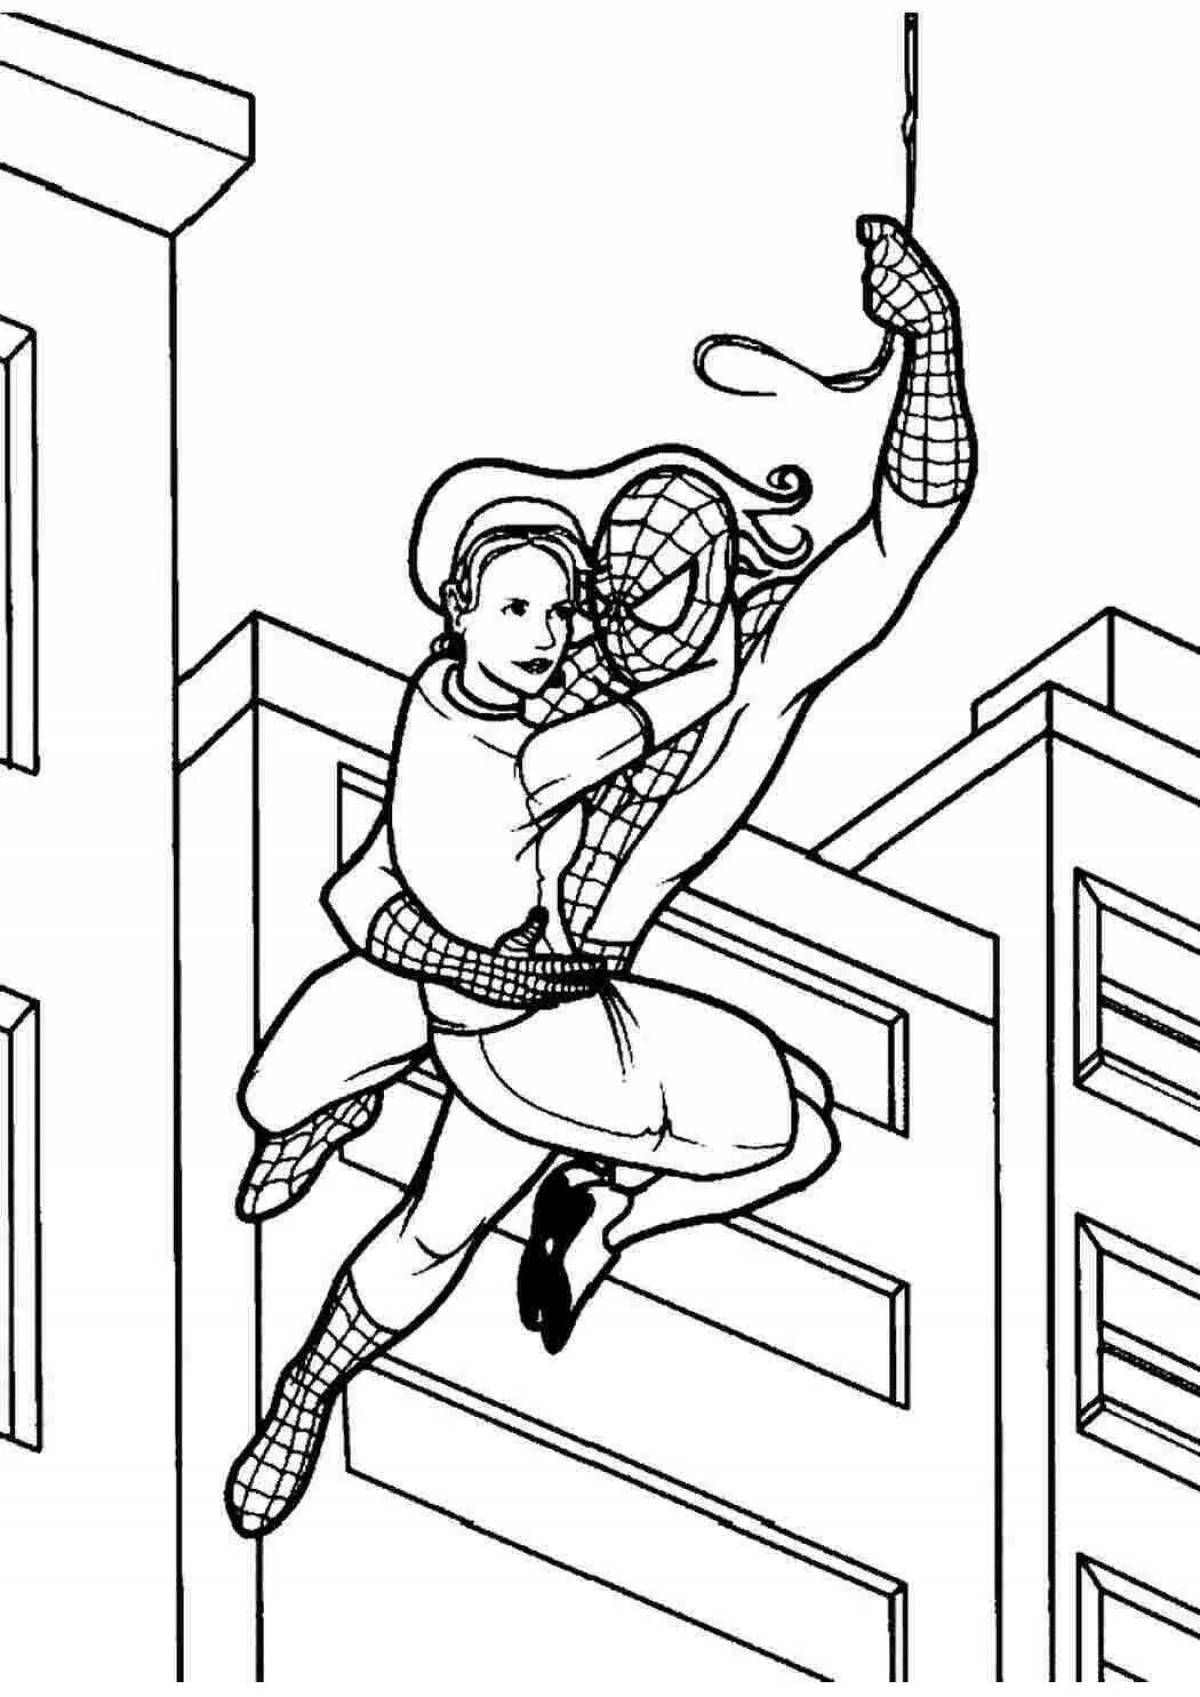 Fabulous Spiderman coloring page